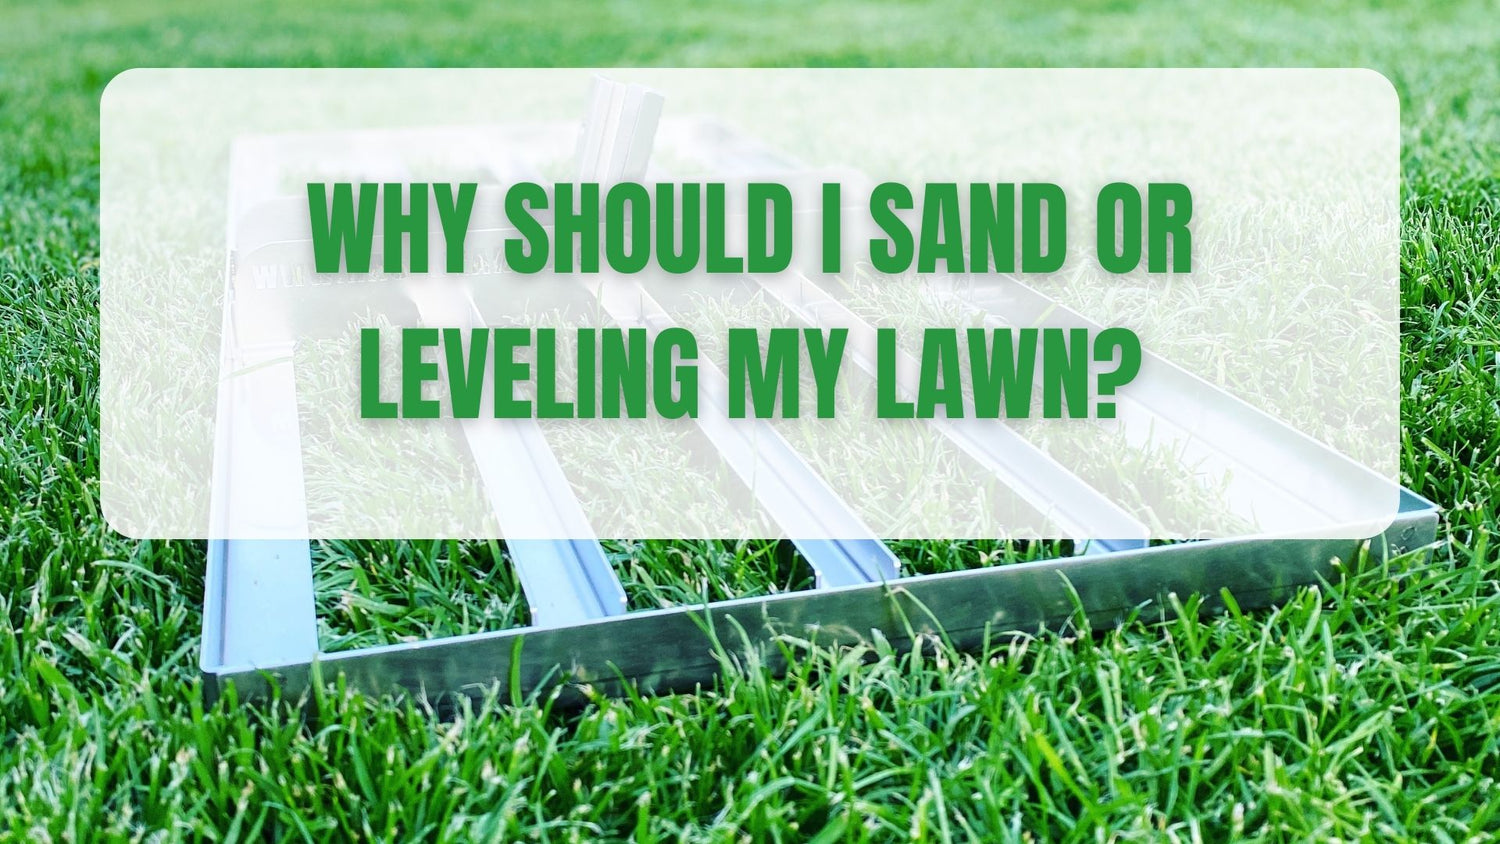 Why Should I Sand or leveling My Lawn?